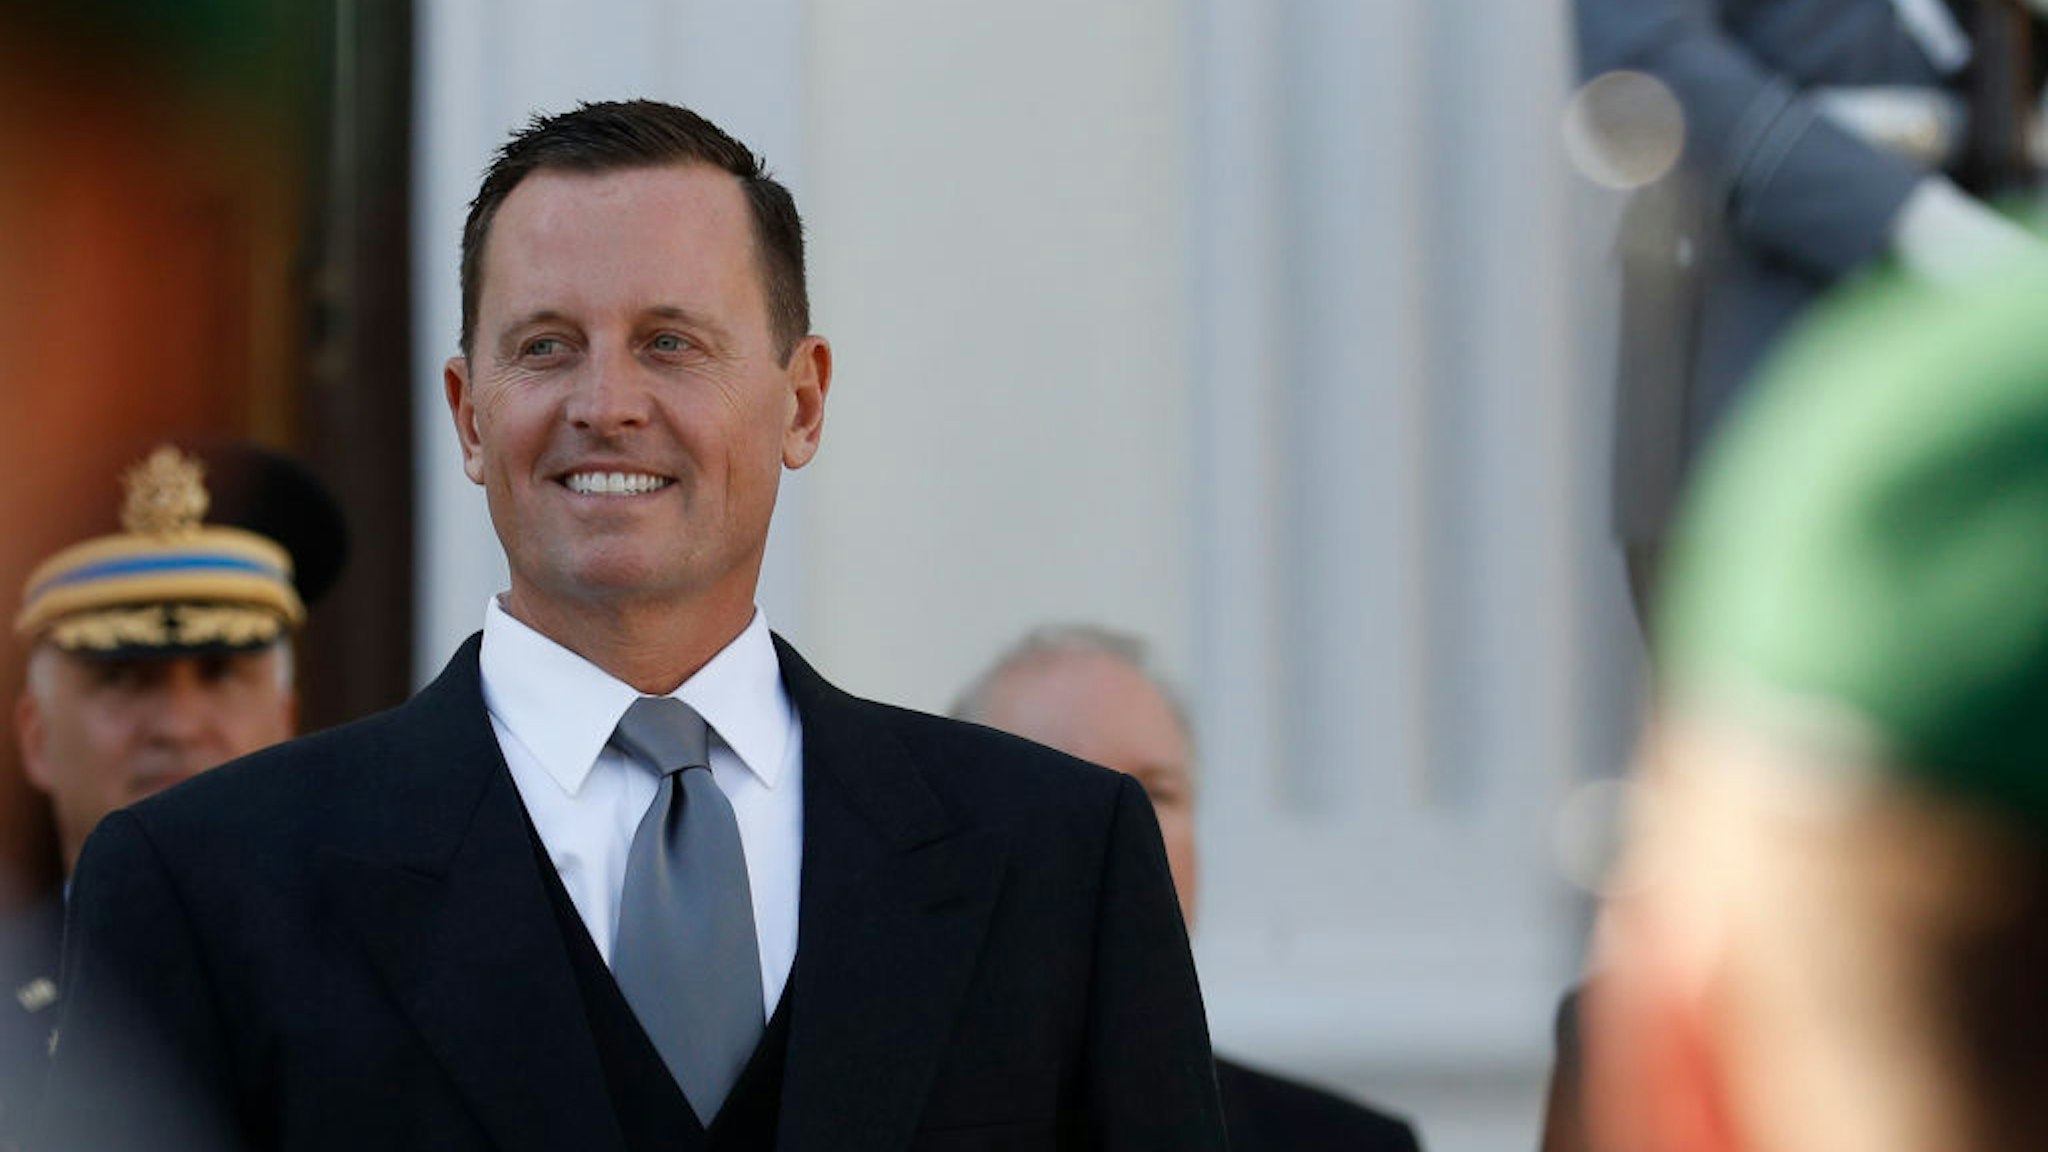 Newly accredited US Ambassador Richard Allen Grenell stands in front of a military honor guard during an accreditation ceremony for new Ambassadors in Berlin, Germany, on May 08, 2018.